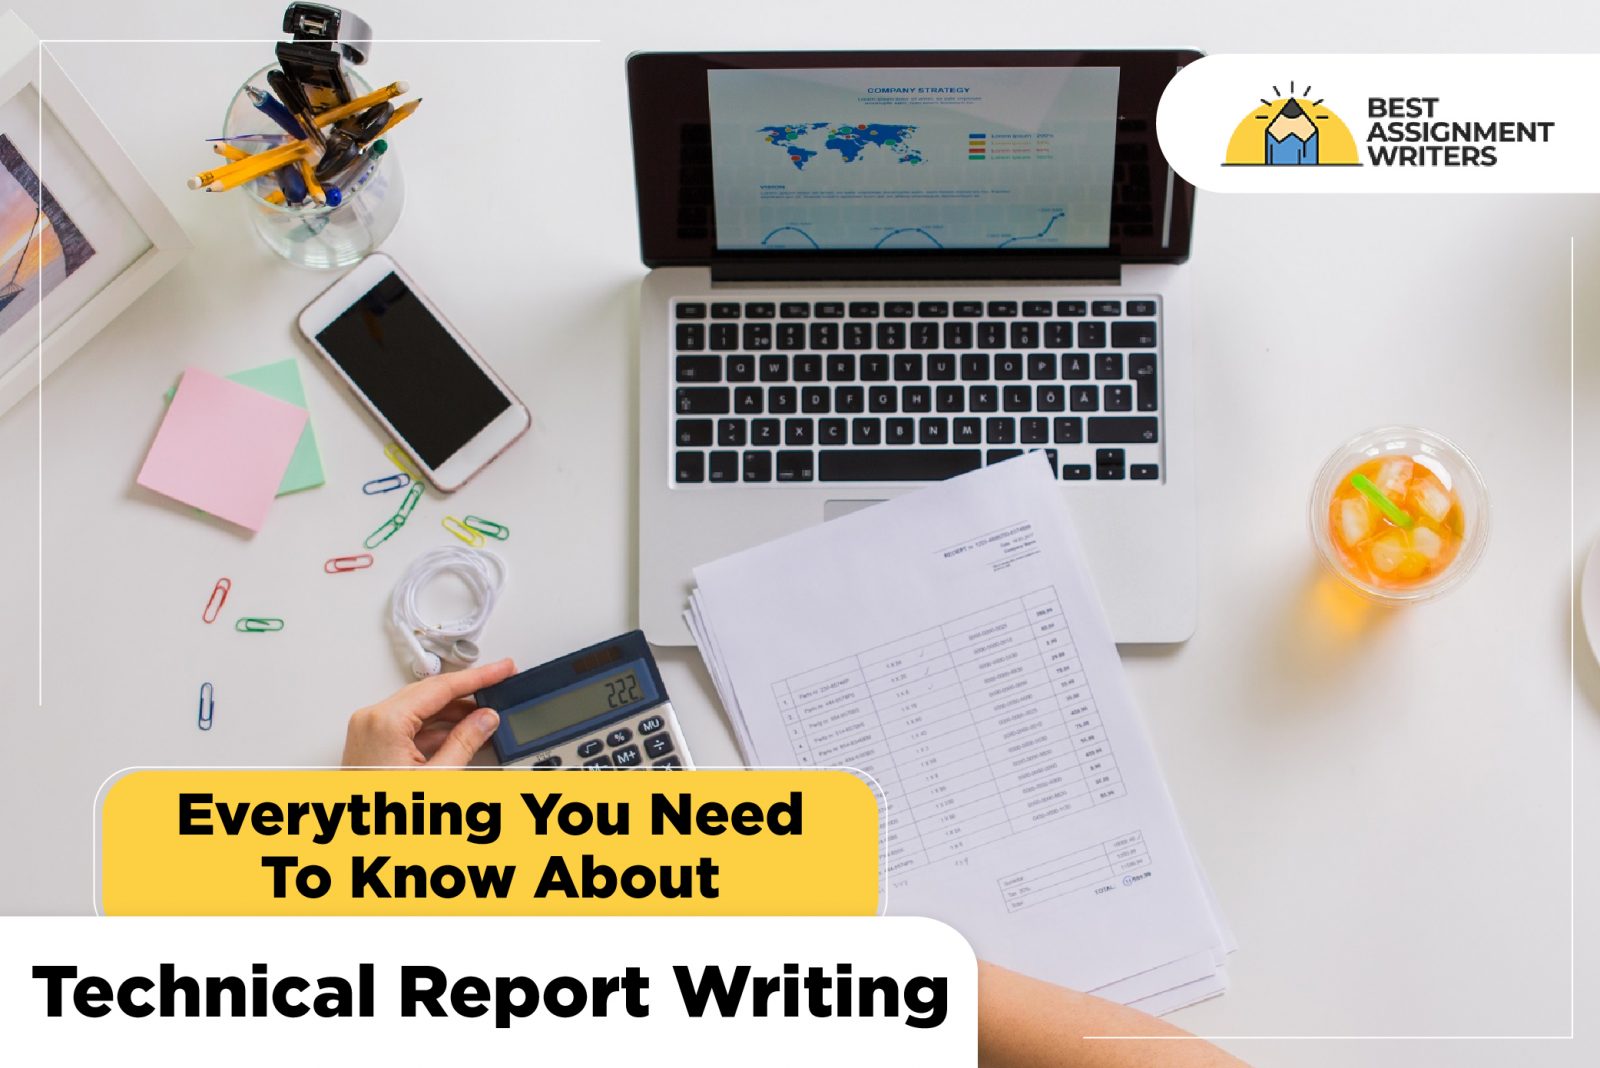 Technical Report Writing Service